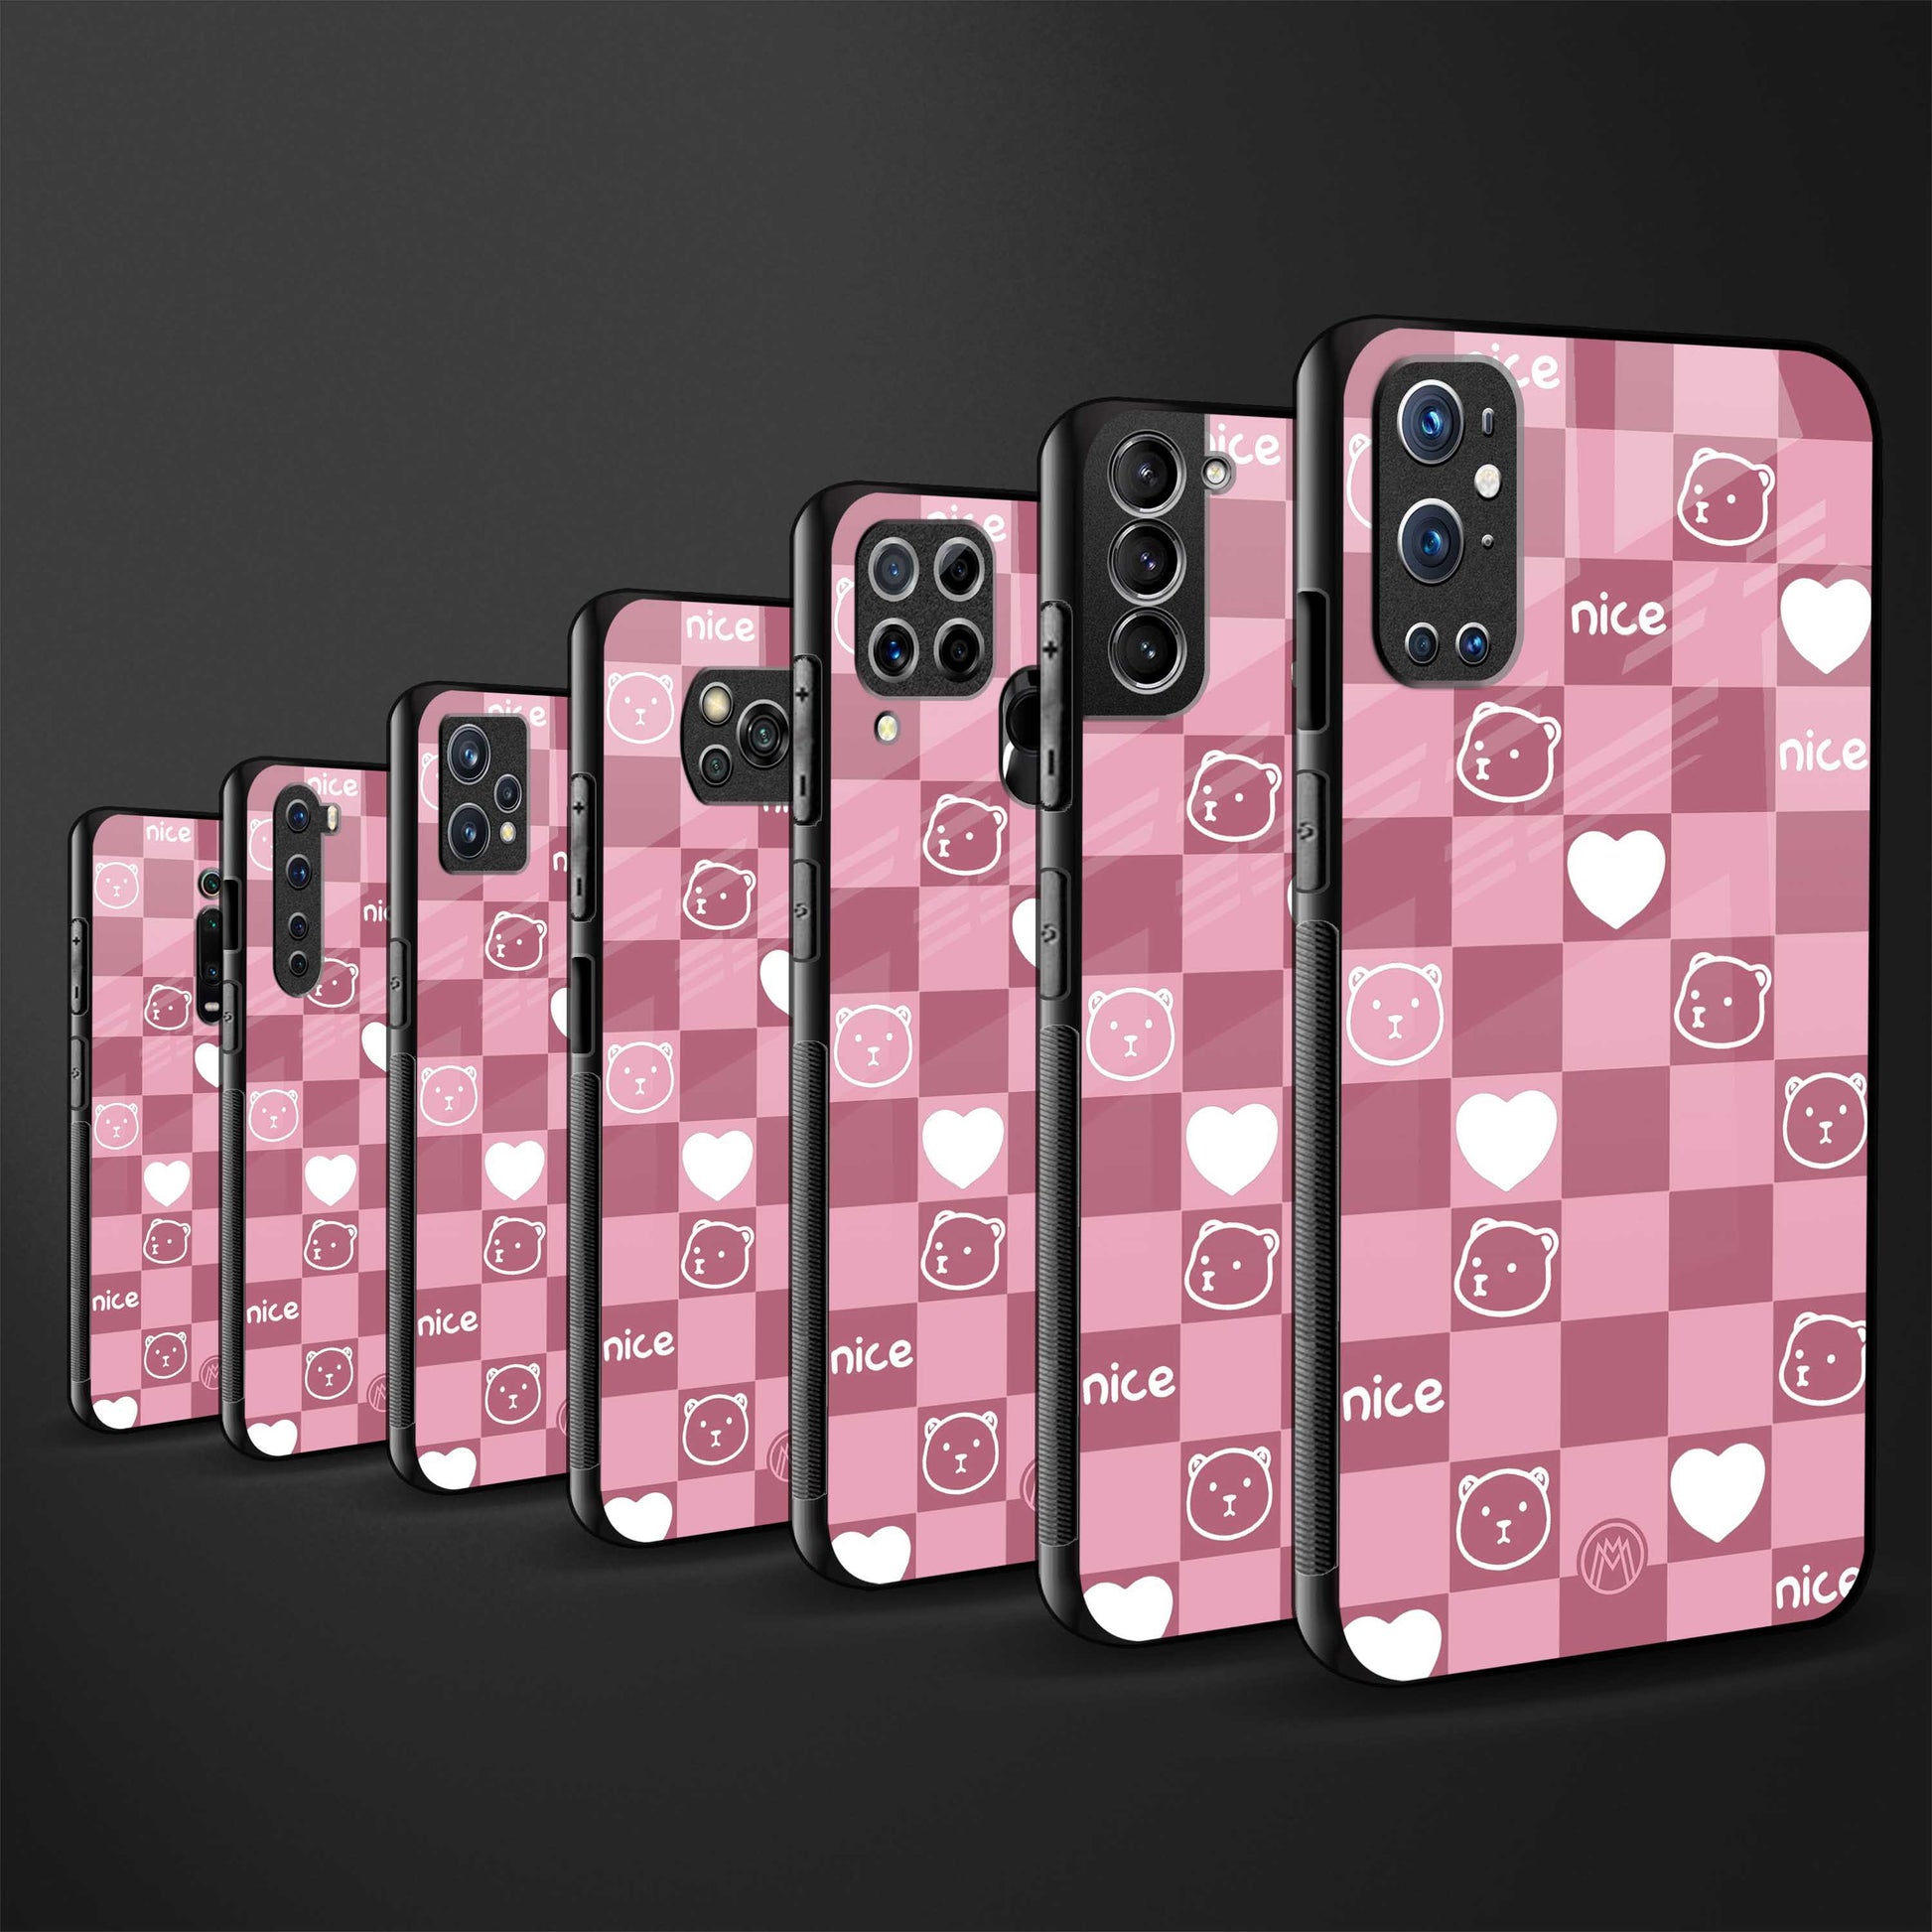 aesthetic bear pattern pink edition back phone cover | glass case for samsung galaxy m33 5g